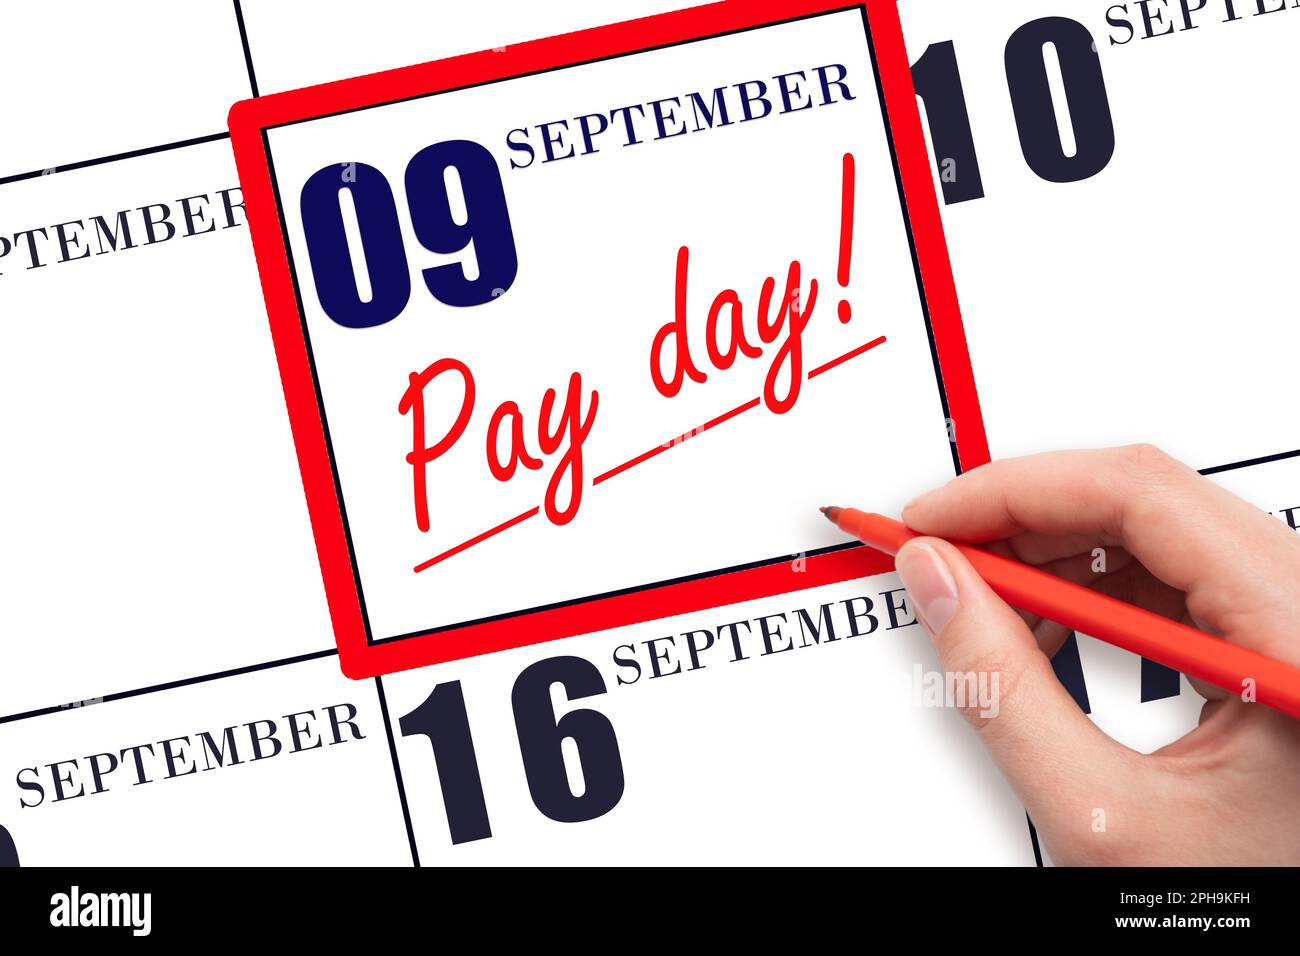 9th day of September. Hand writing text PAY DATE on calendar date September  9 and underline it. Payment due date.  Reminder concept of payment. Autum Stock Photo